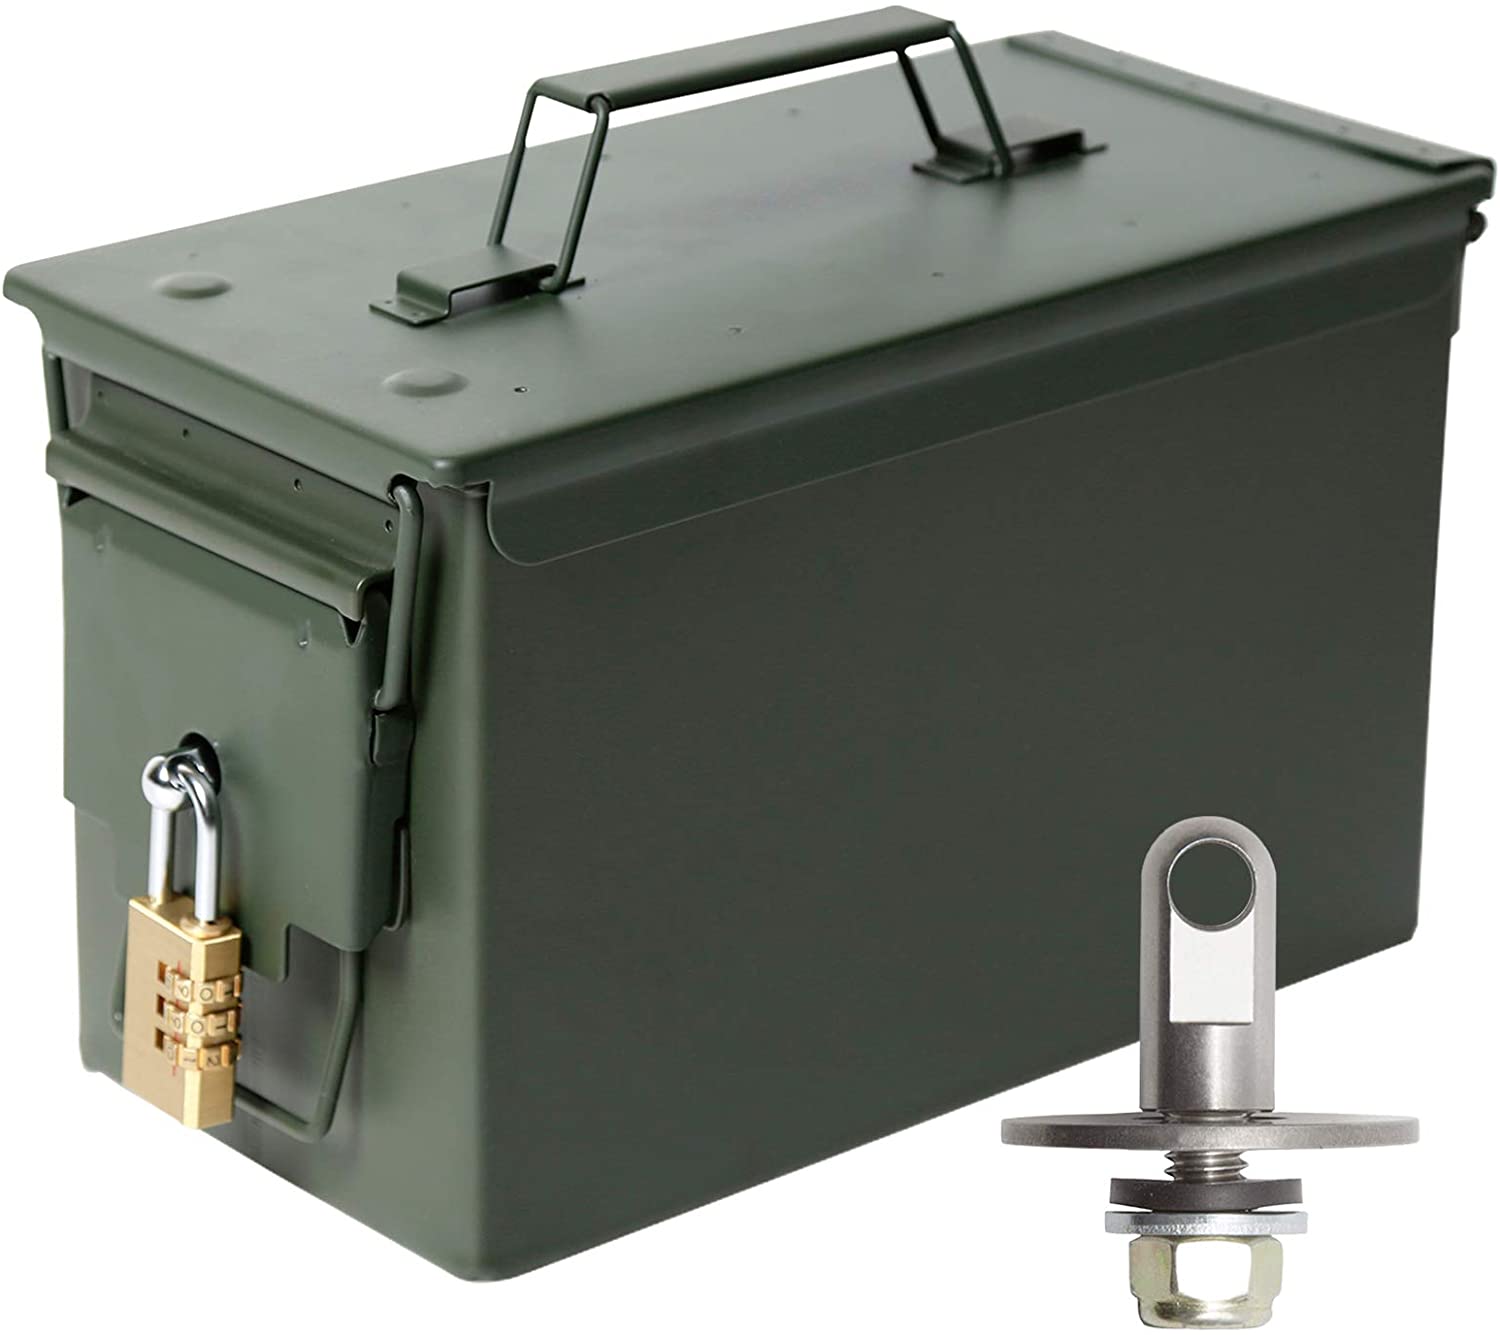 M19A1 .30 Cal Metal Ammo Box Tool Box For Hunting, Shooting, Outdoor